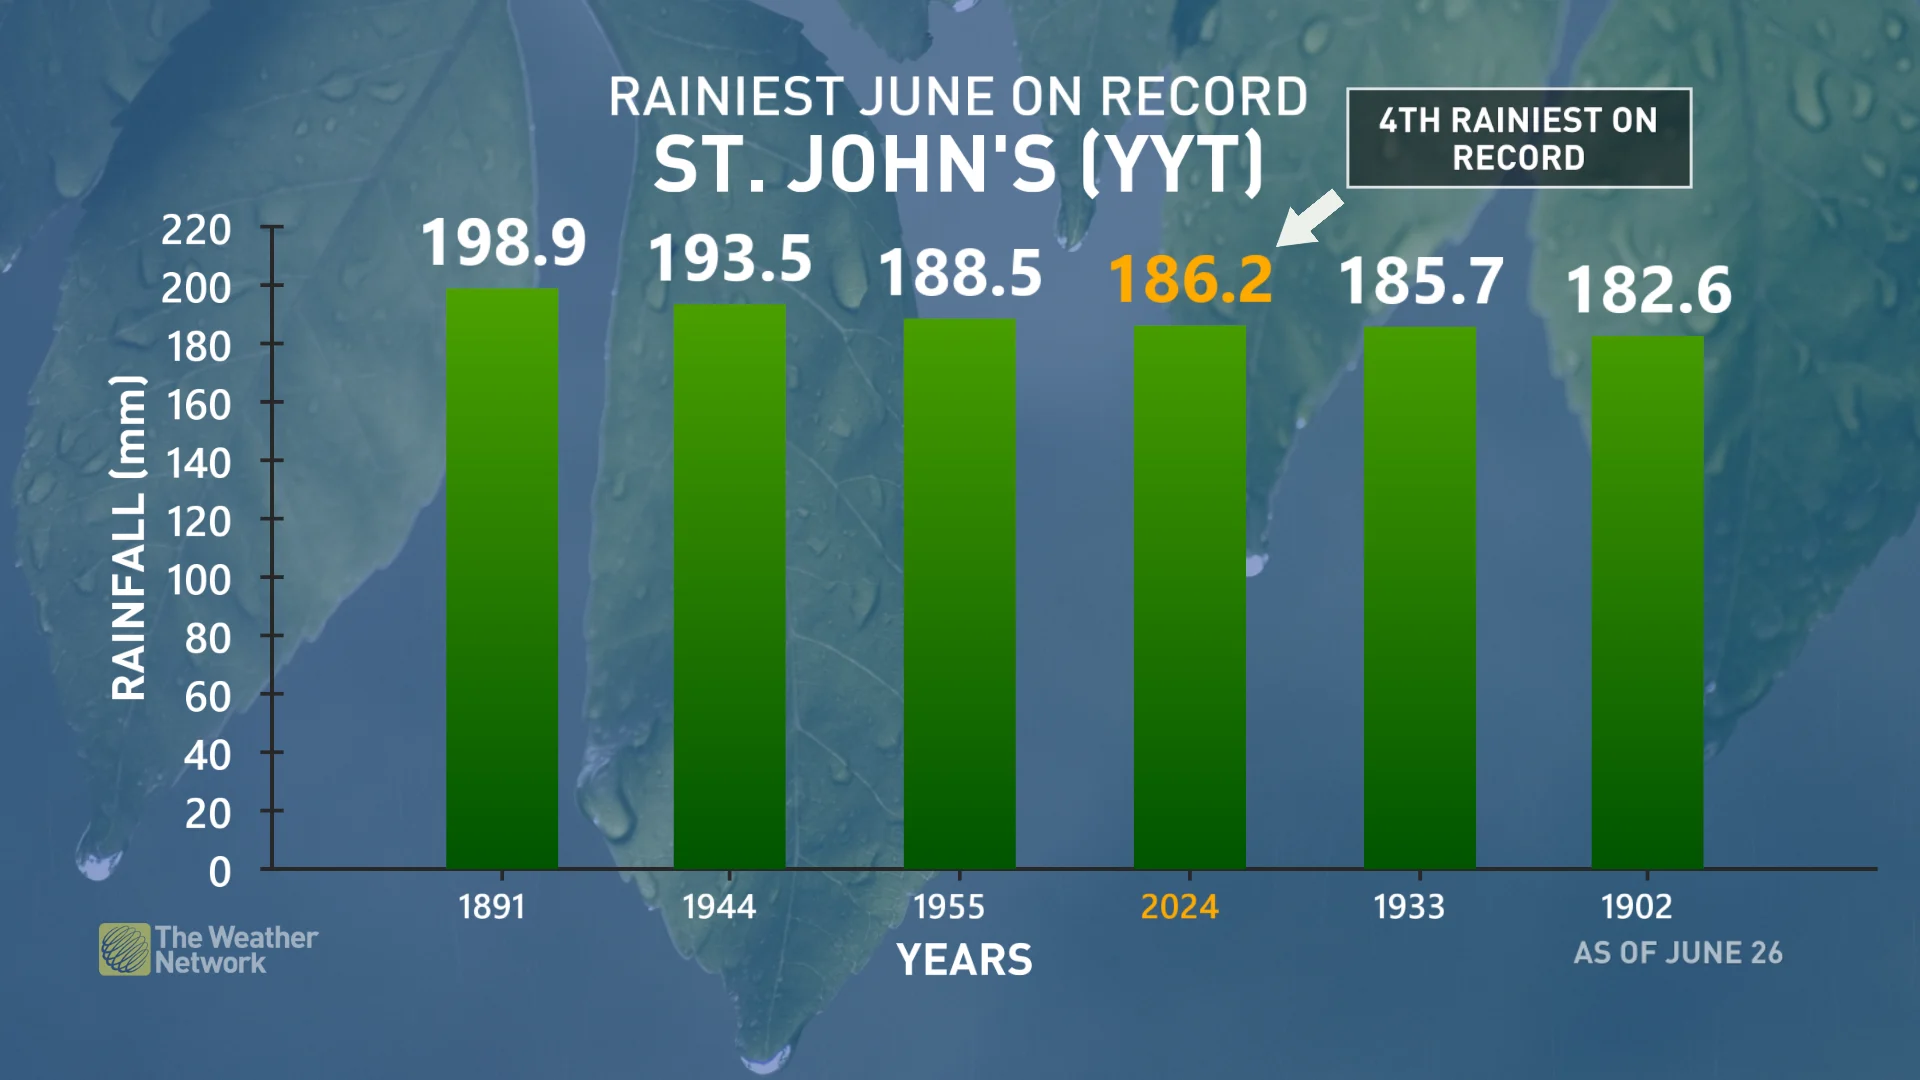 Baron - Rainiest June on record for St. Johns